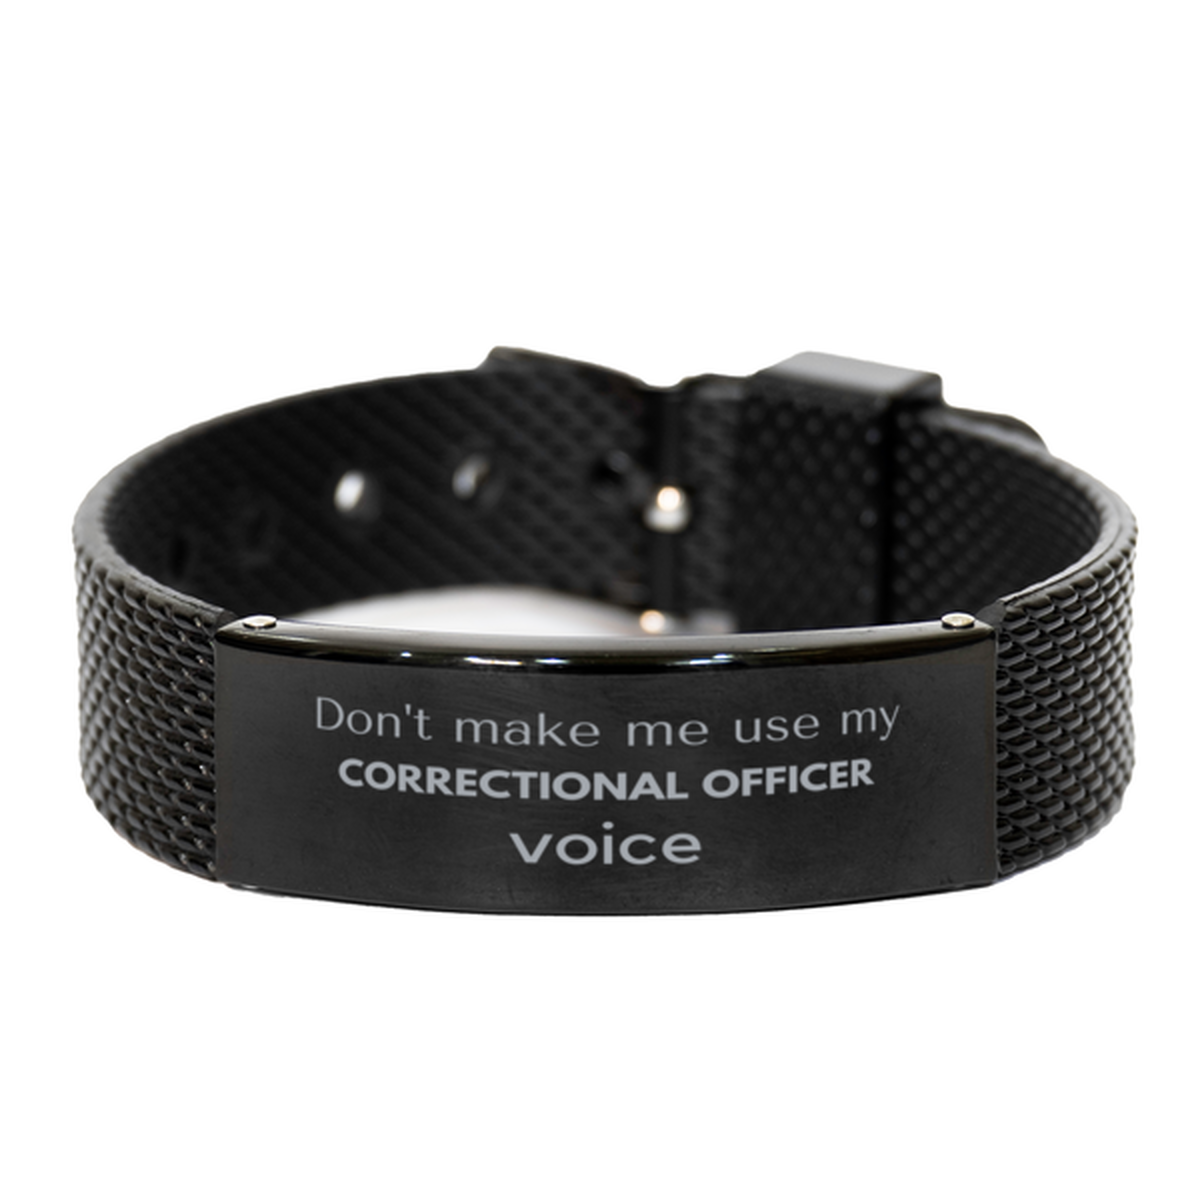 Don't make me use my Correctional Officer voice, Sarcasm Correctional Officer Gifts, Christmas Correctional Officer Black Shark Mesh Bracelet Birthday Unique Gifts For Correctional Officer Coworkers, Men, Women, Colleague, Friends